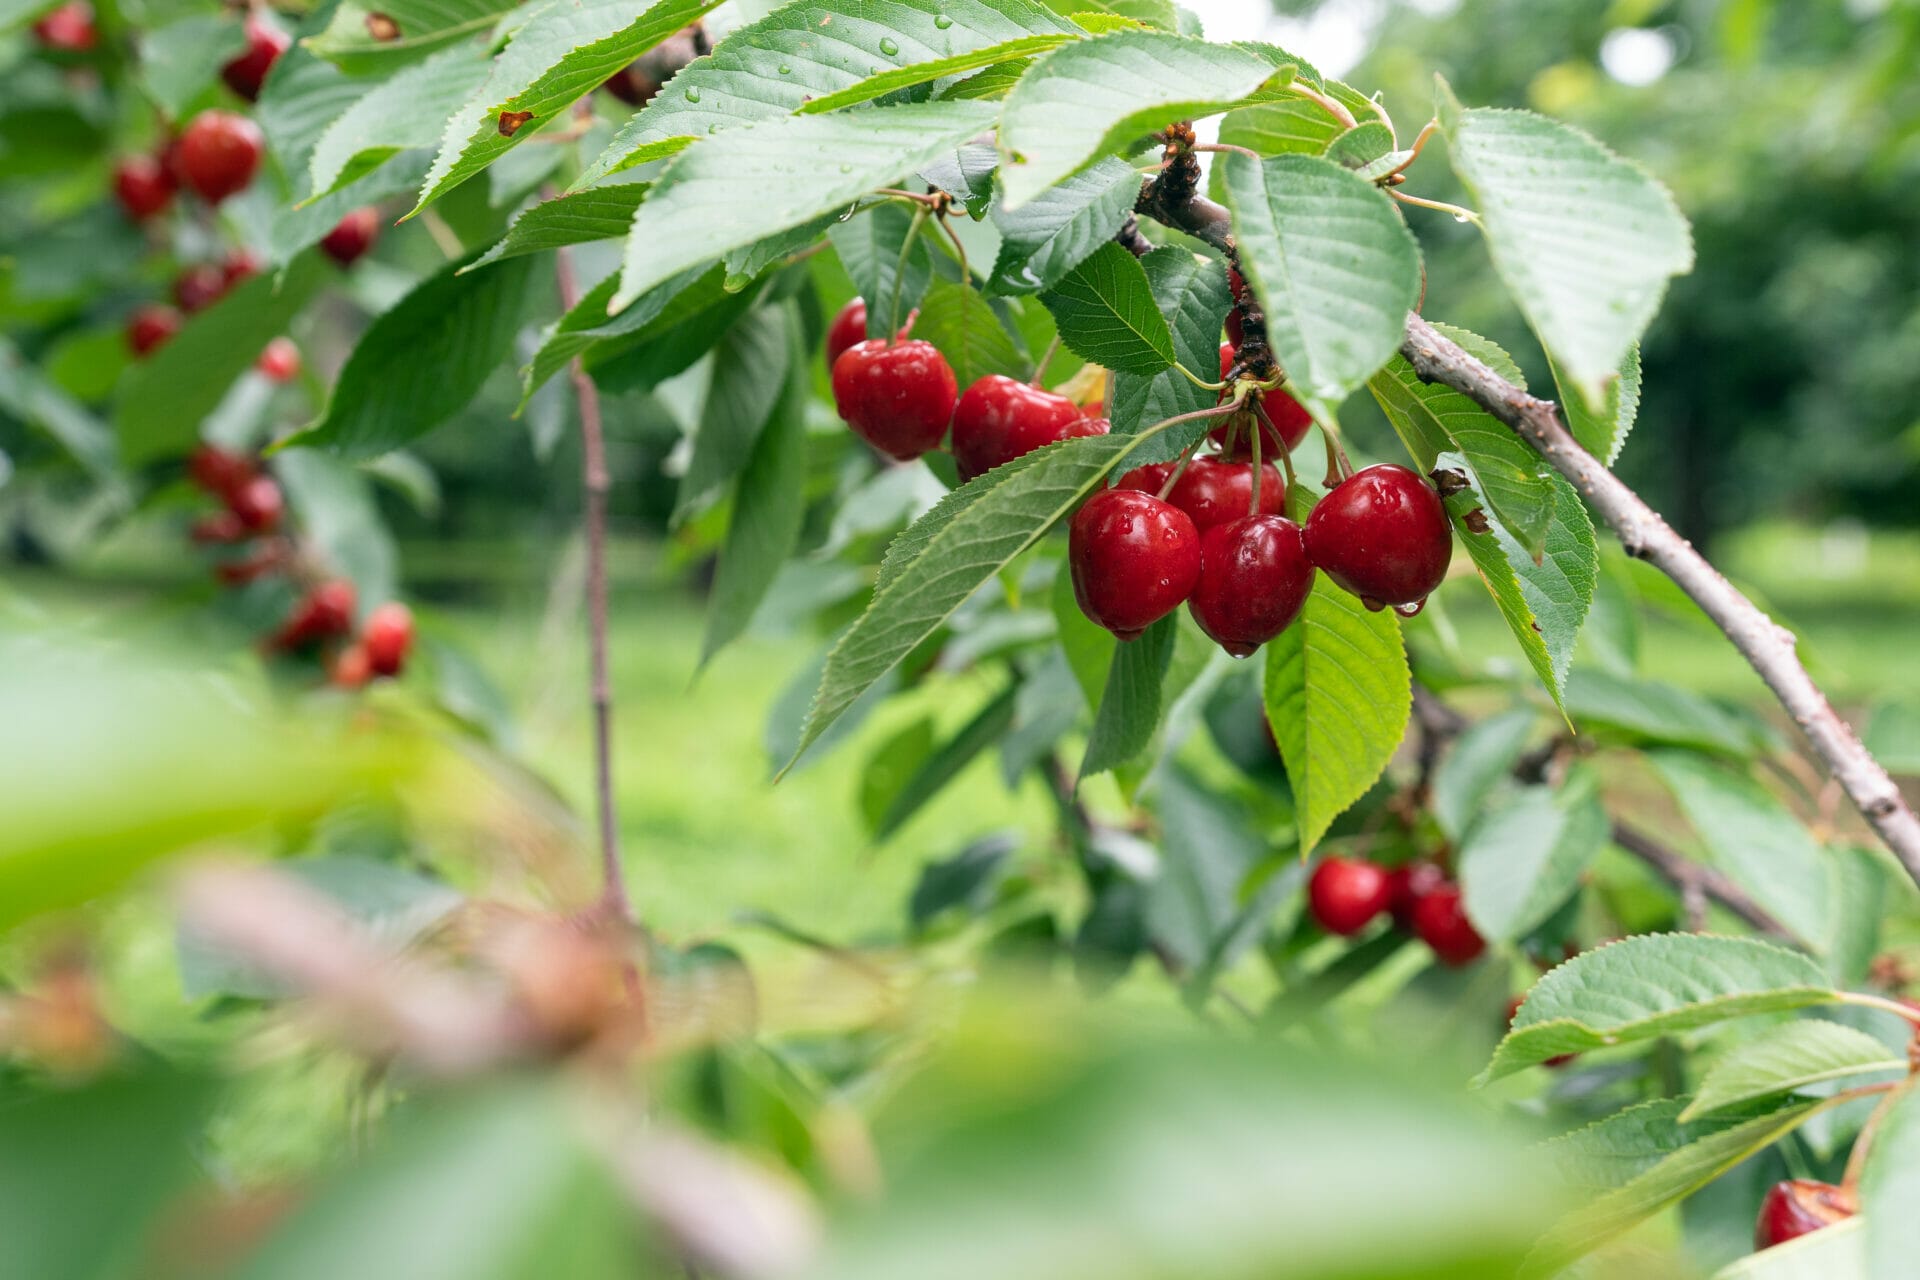 All About Cherries: Nutrition, Benefits, Types, Side Effects, and More